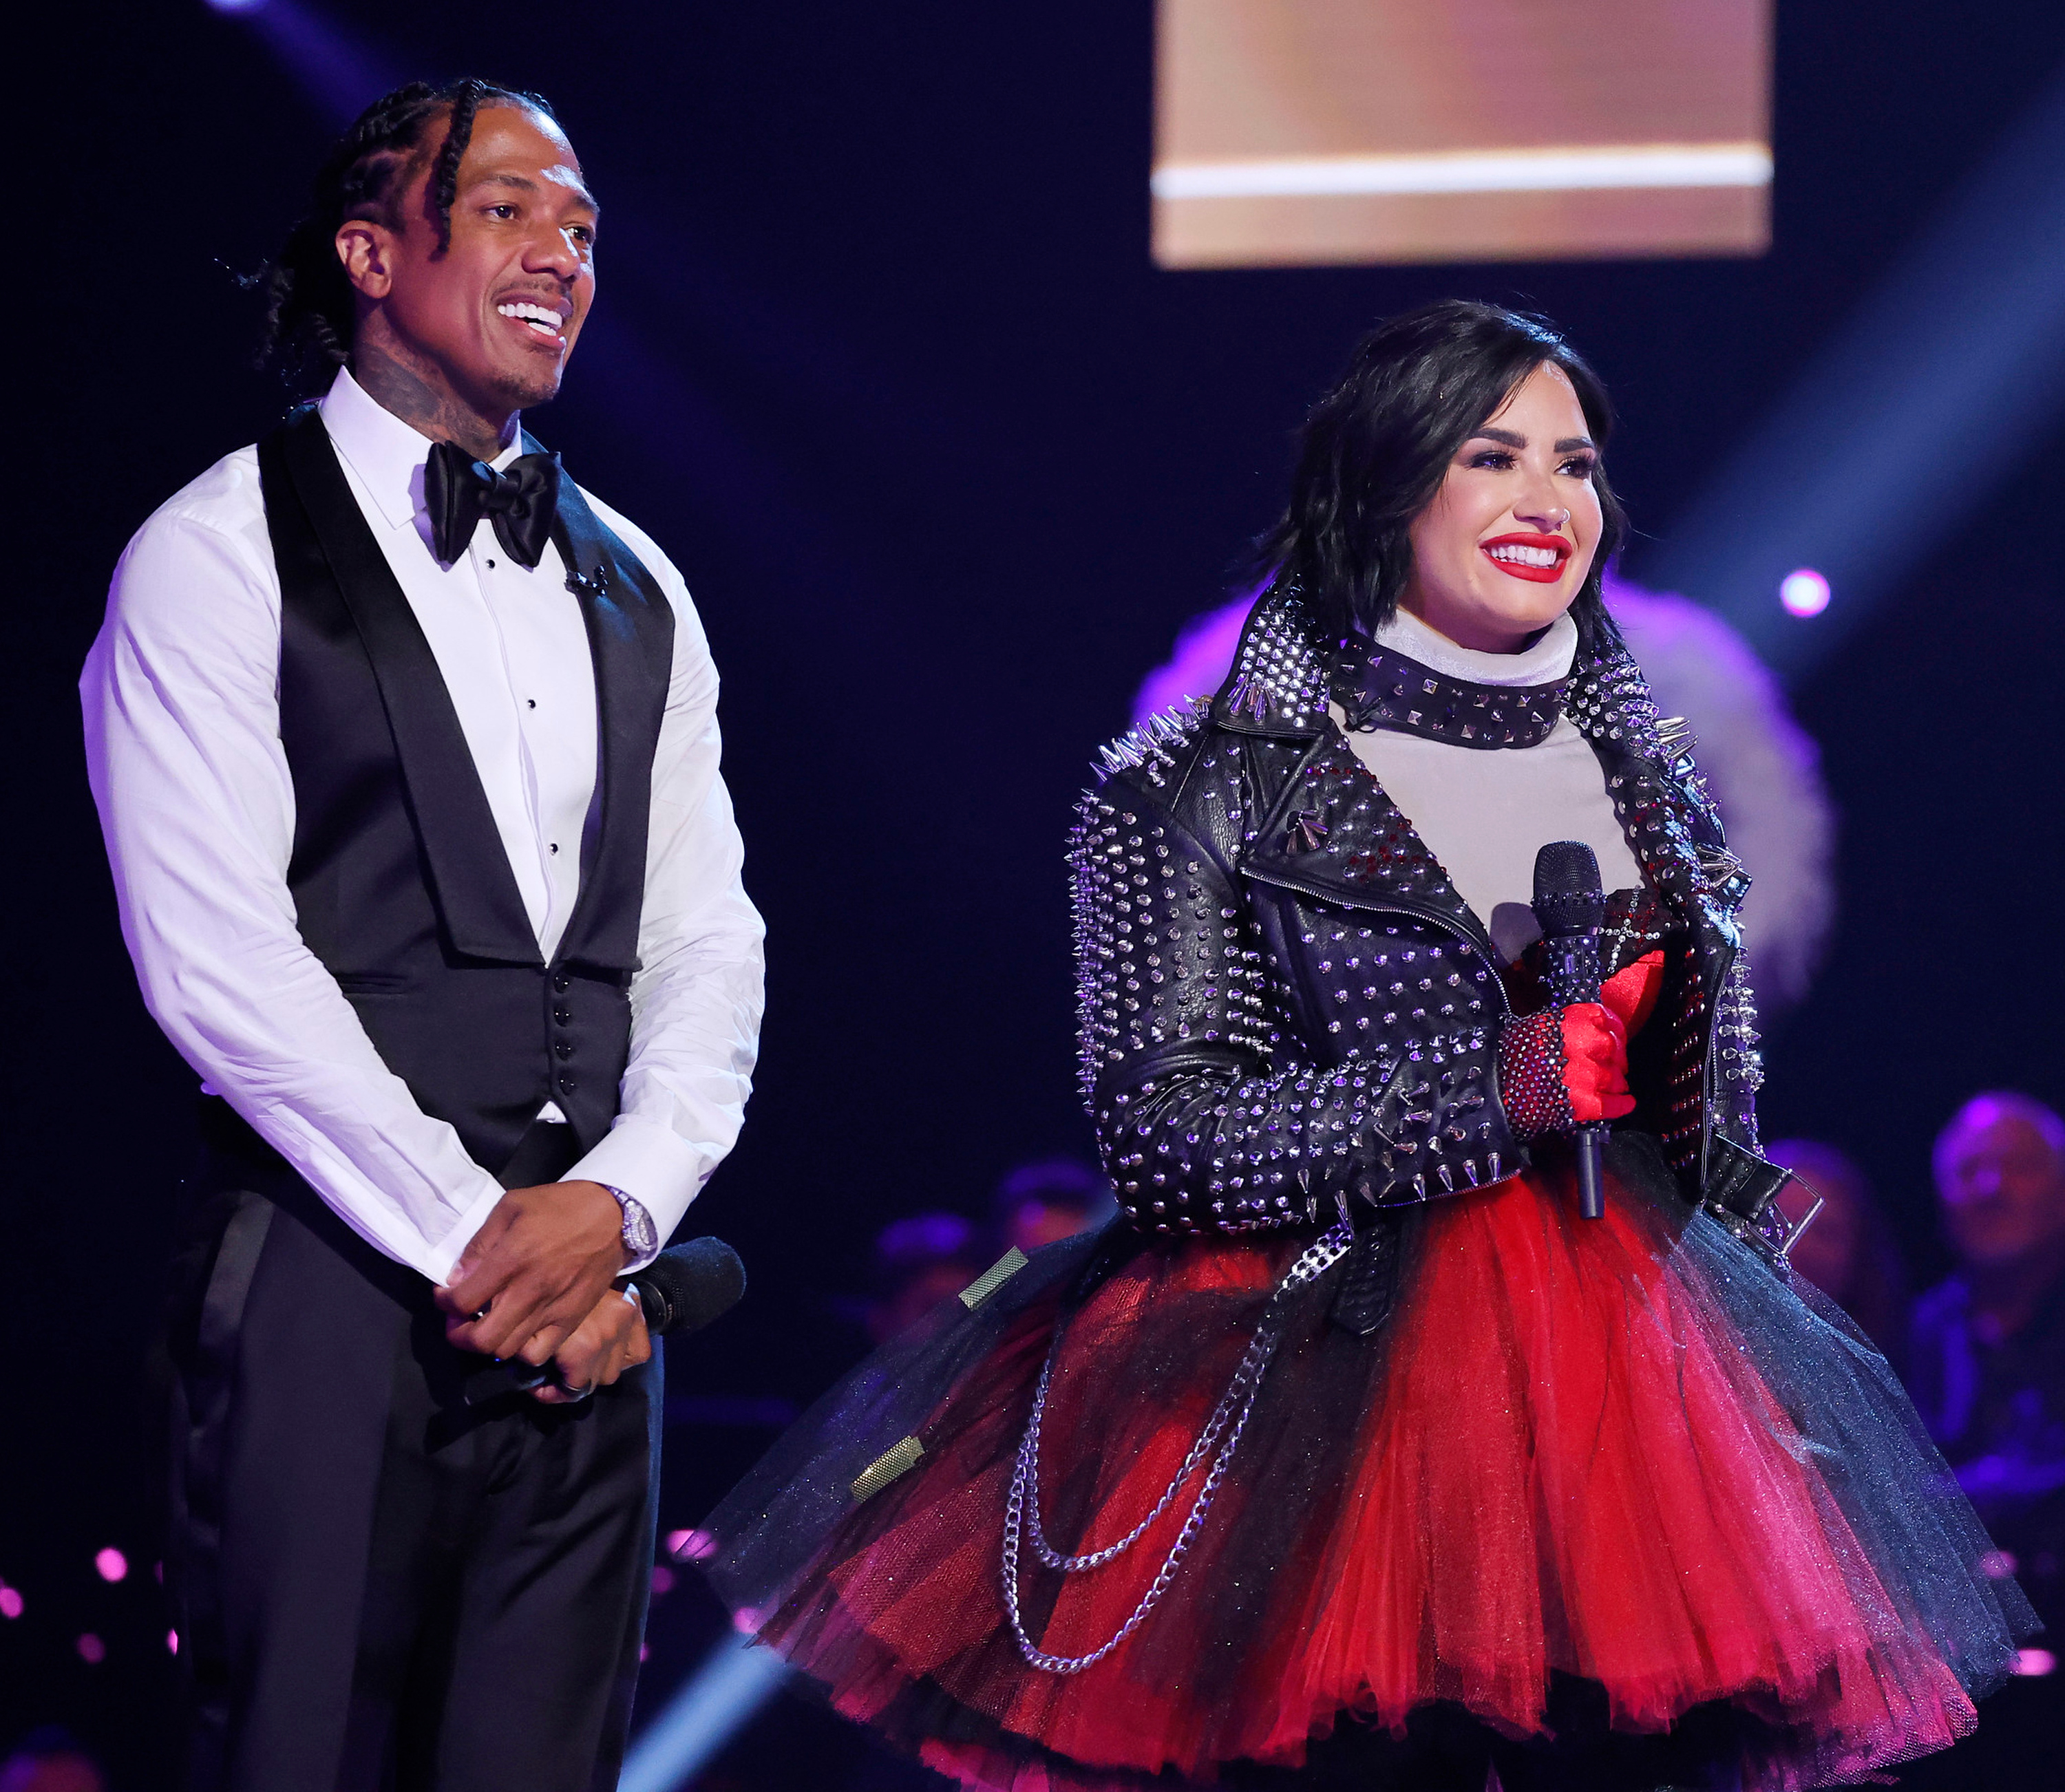 Two people on stage, one in a tuxedo, and the other in a studded jacket and tulle skirt, smiling with a microphone in hand